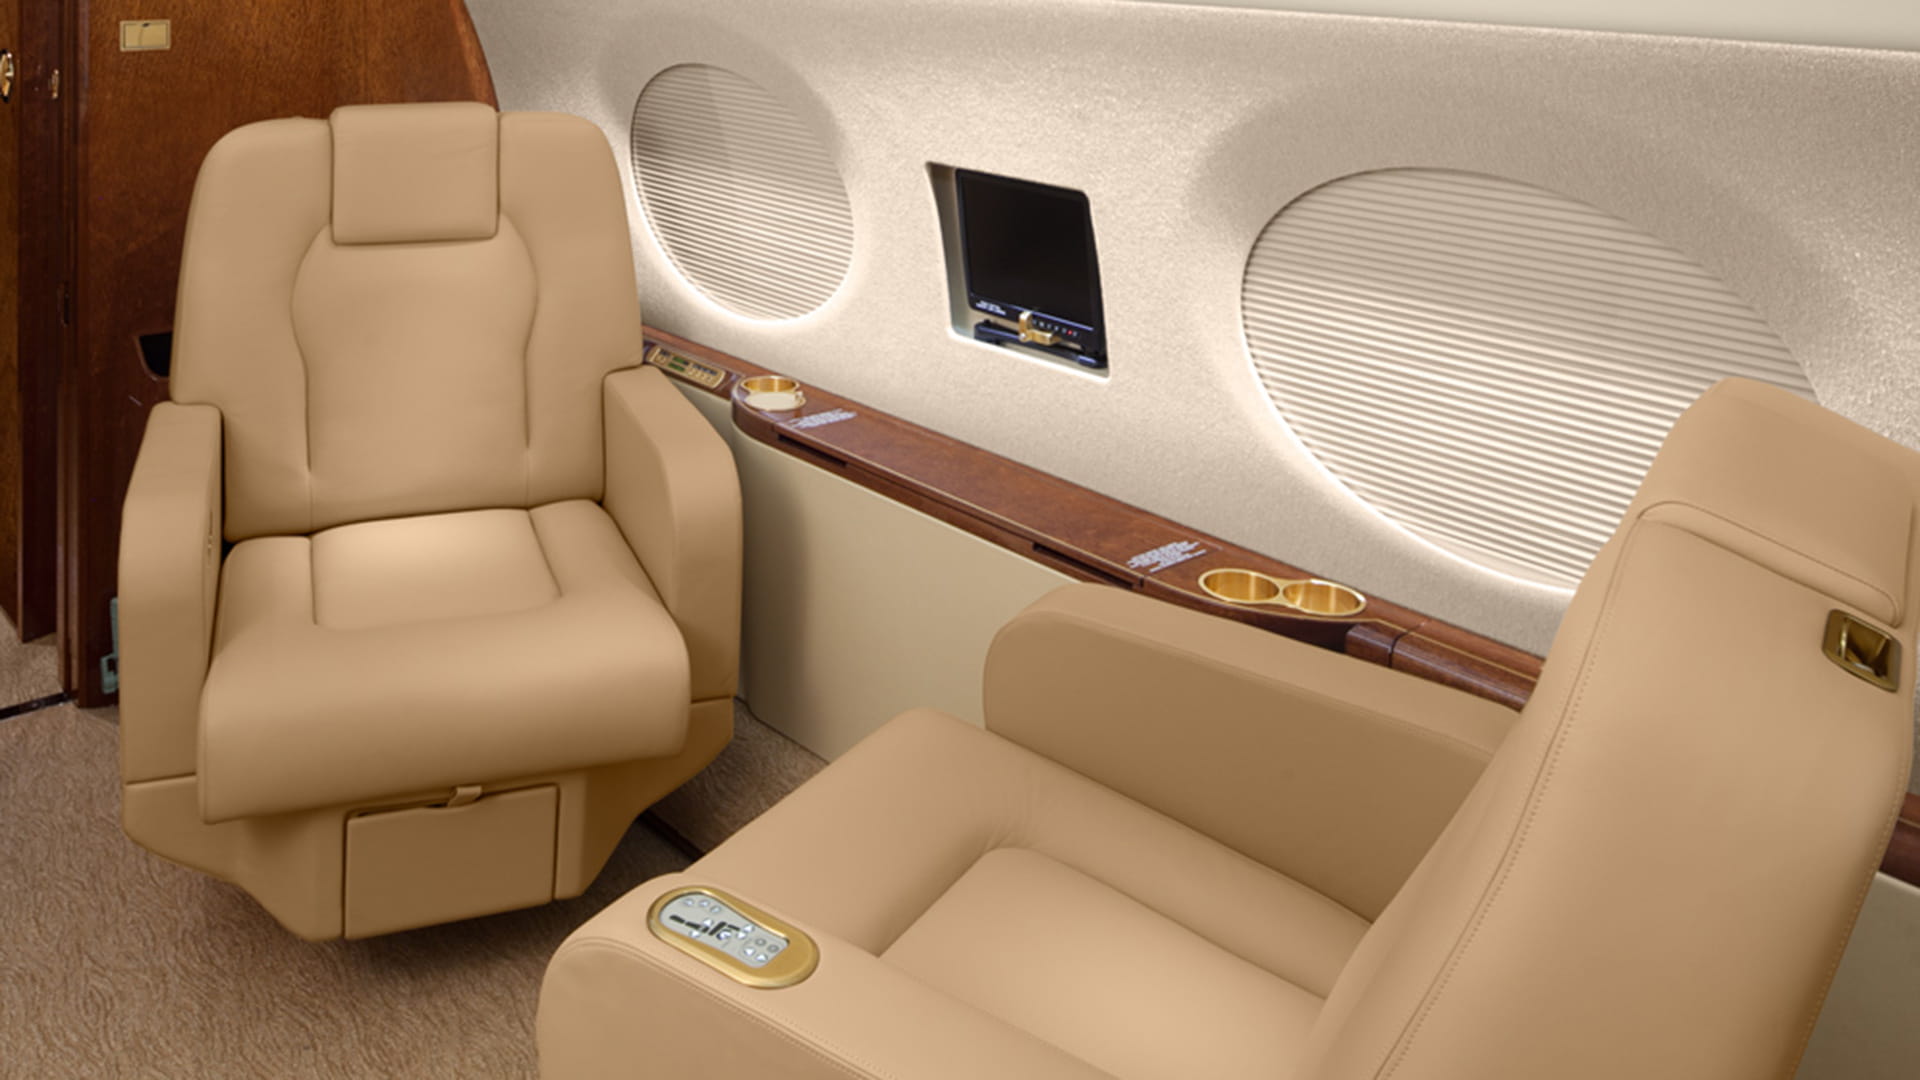 A business jet interior shown with 3X Nano lighting